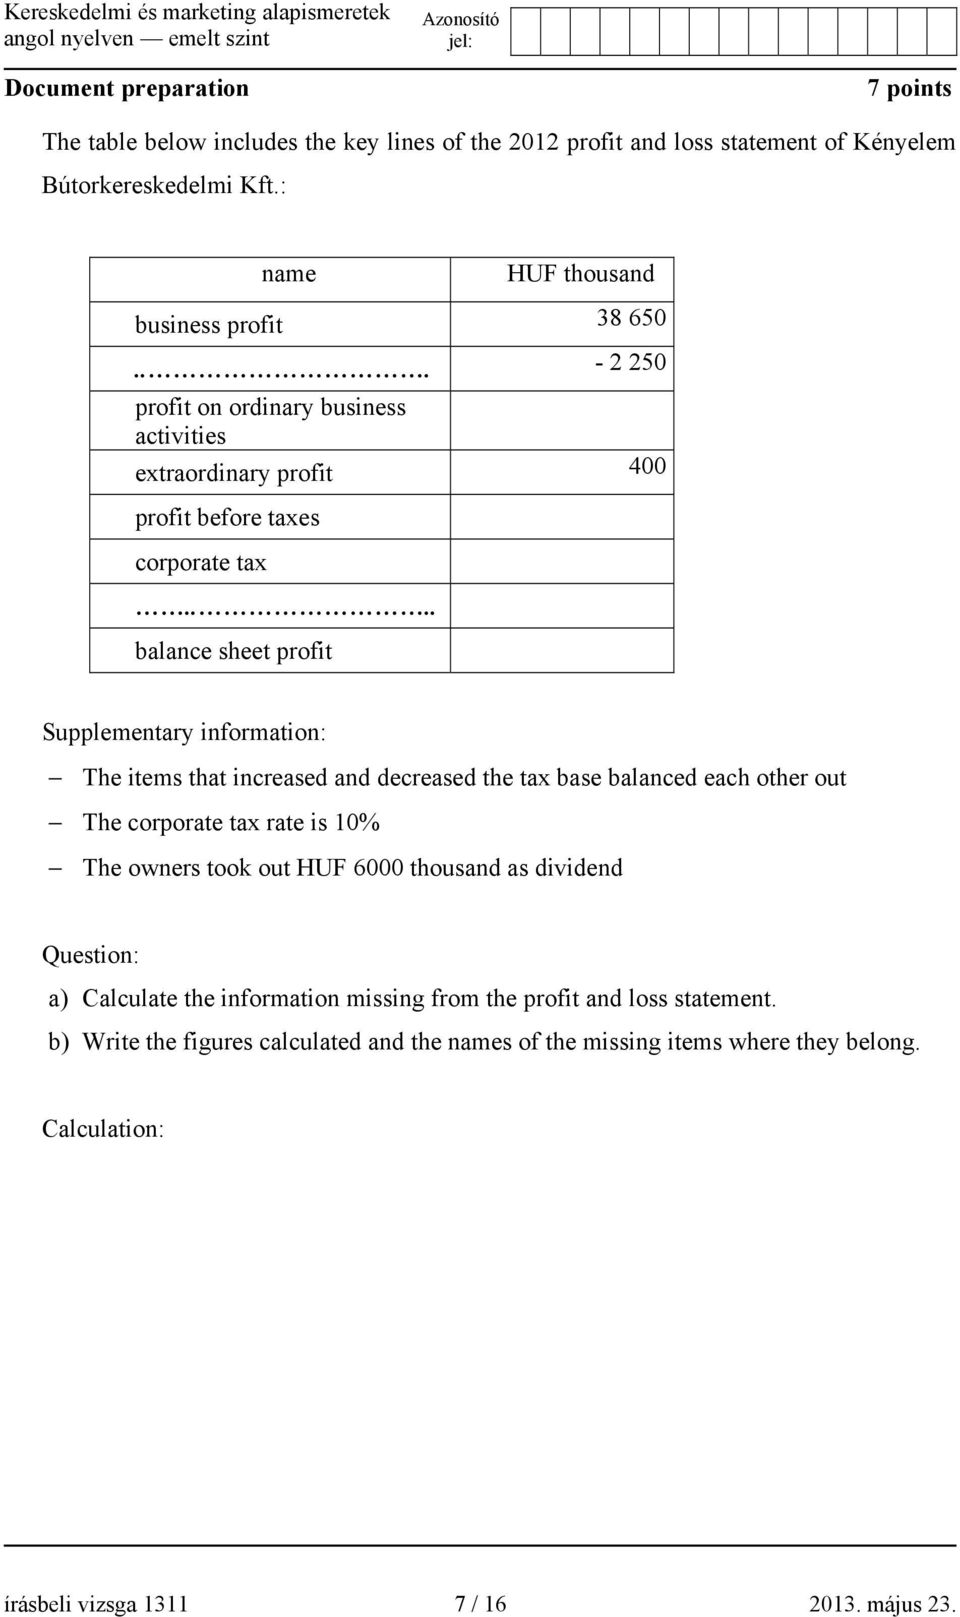 ... balance sheet profit Supplementary information: The items that increased and decreased the tax base balanced each other out The corporate tax rate is 10% The owners took out HUF